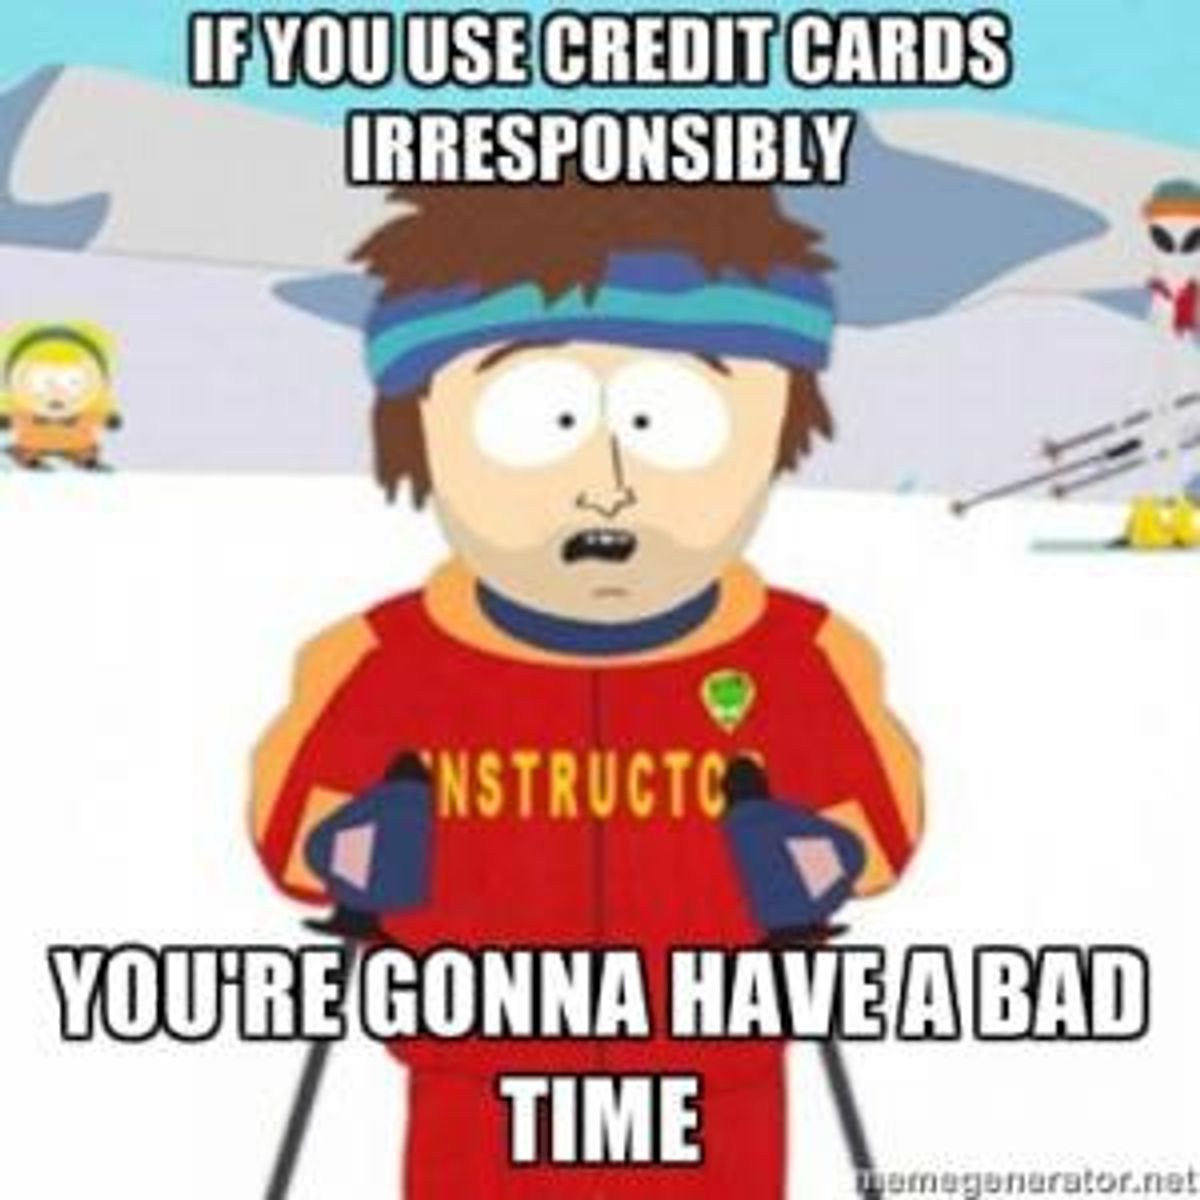 Credit Cards: Friend Or Foe?